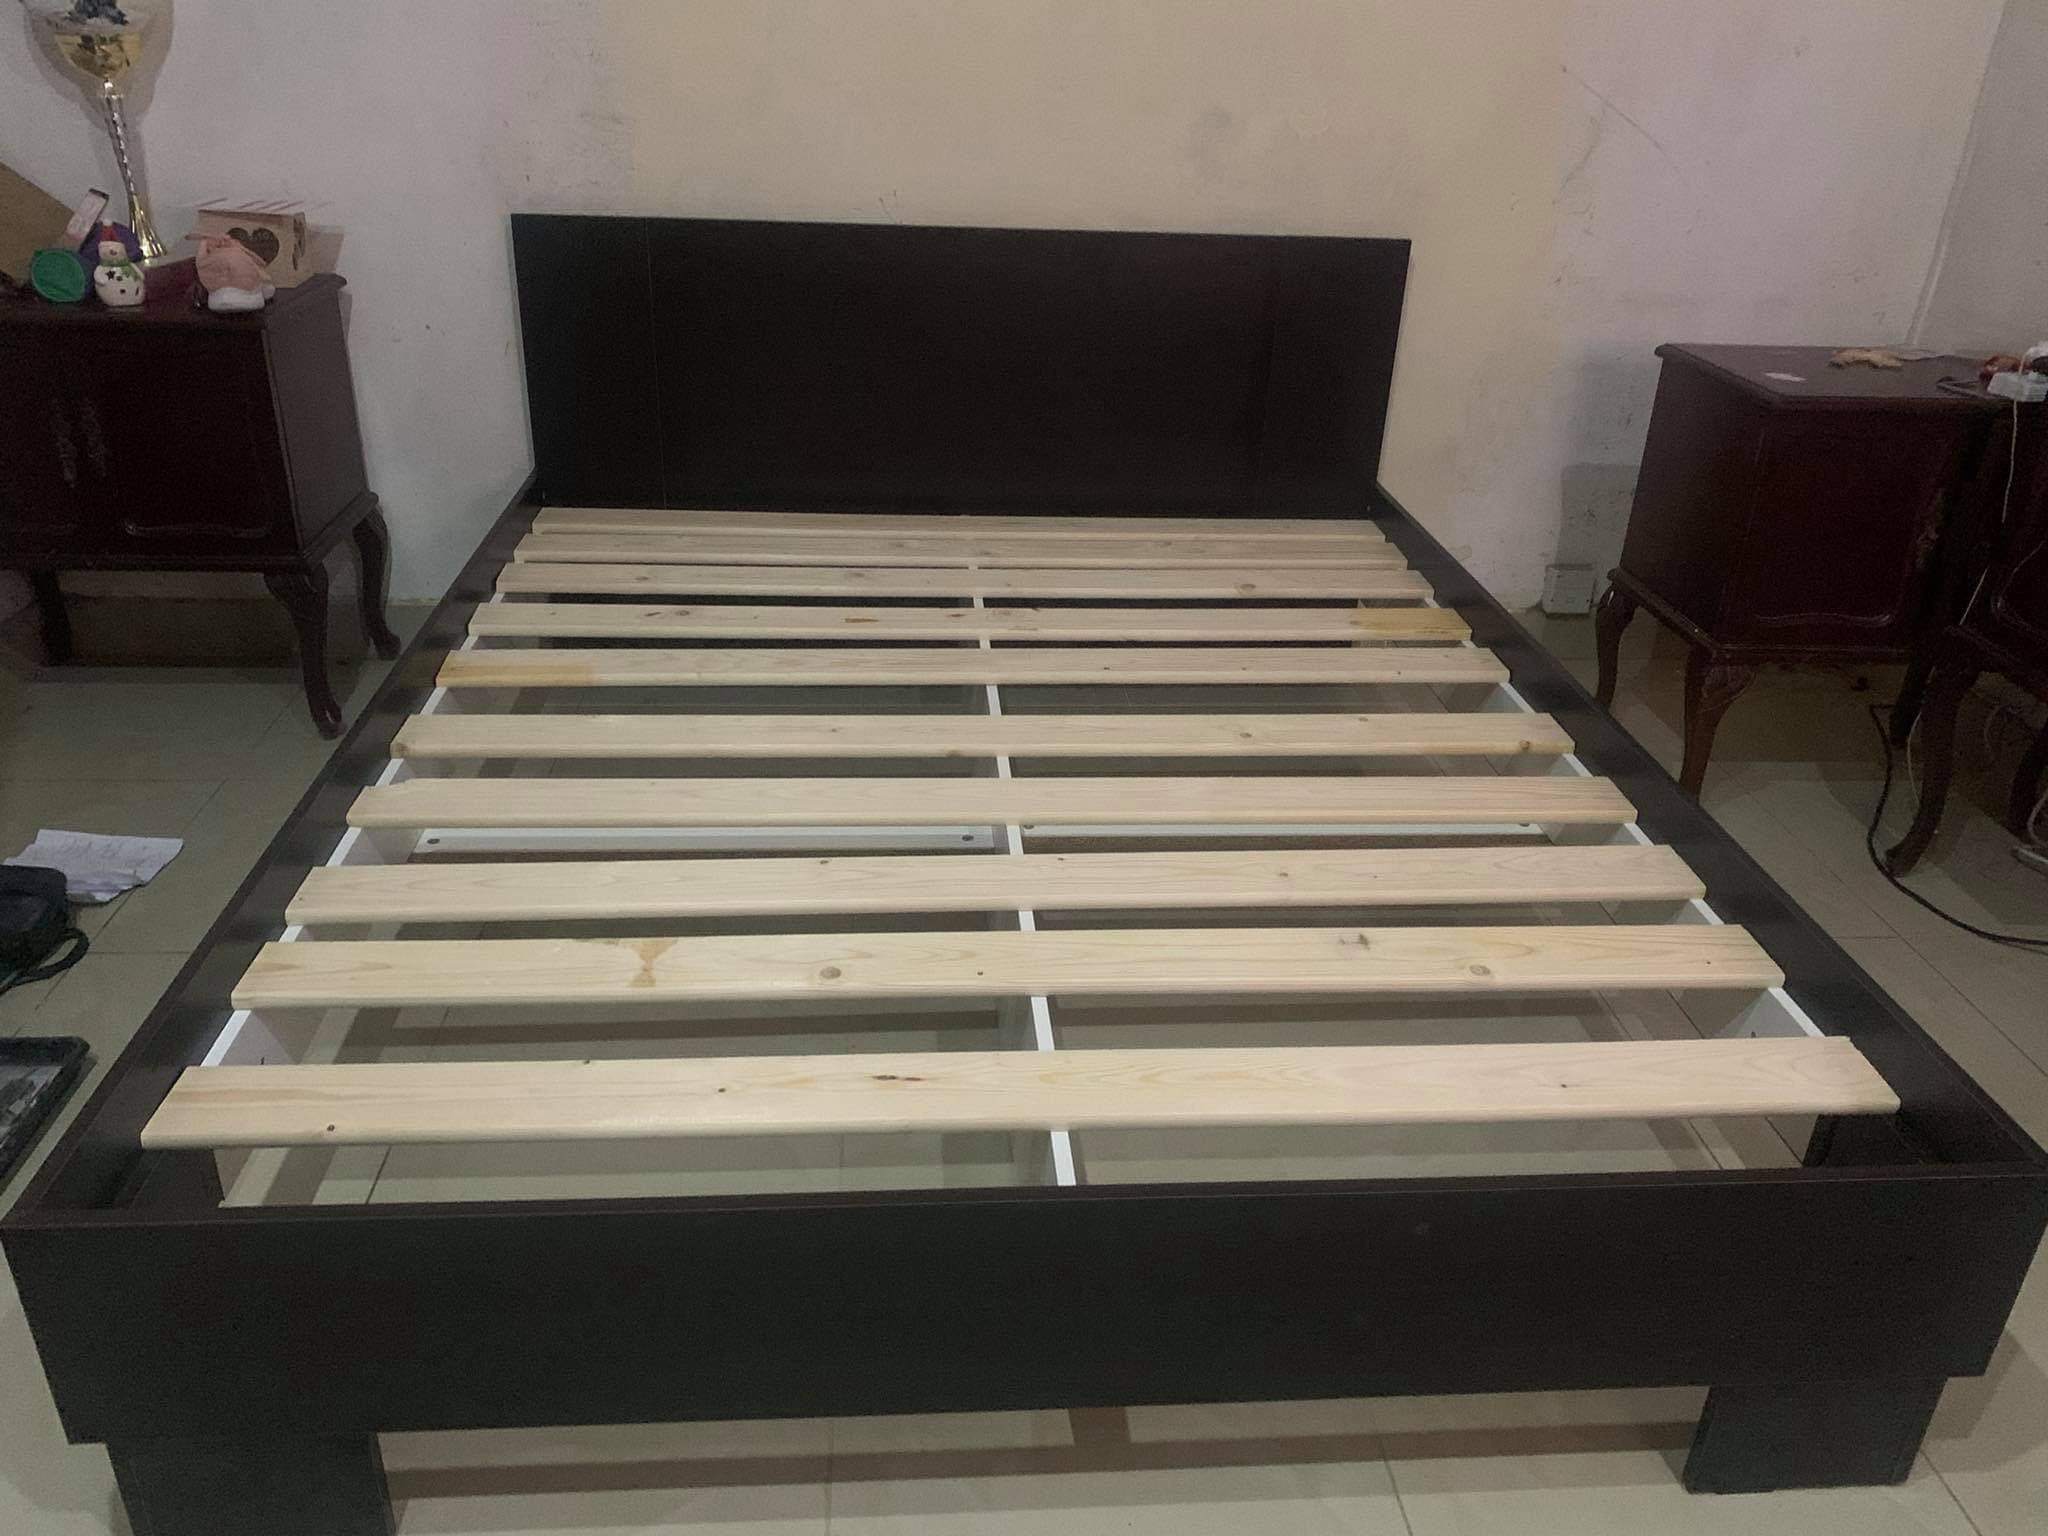 Double Size Bed 140cm x 190cm in Dark Brown Wenge Color Including Idea Workmate